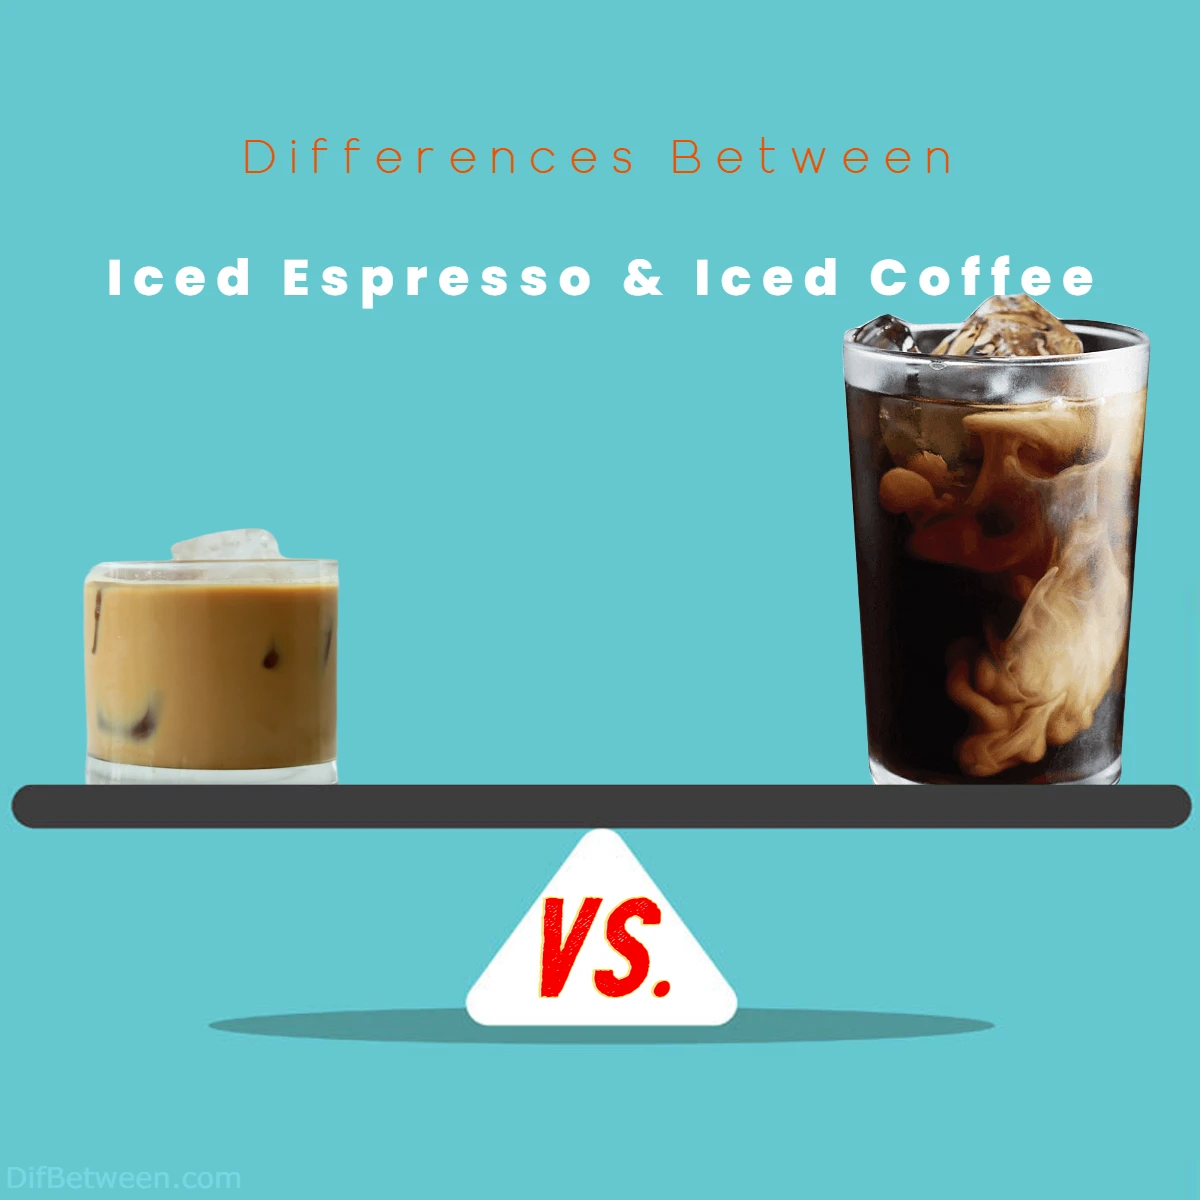 Difference Between Iced Coffee and Iced Espresso